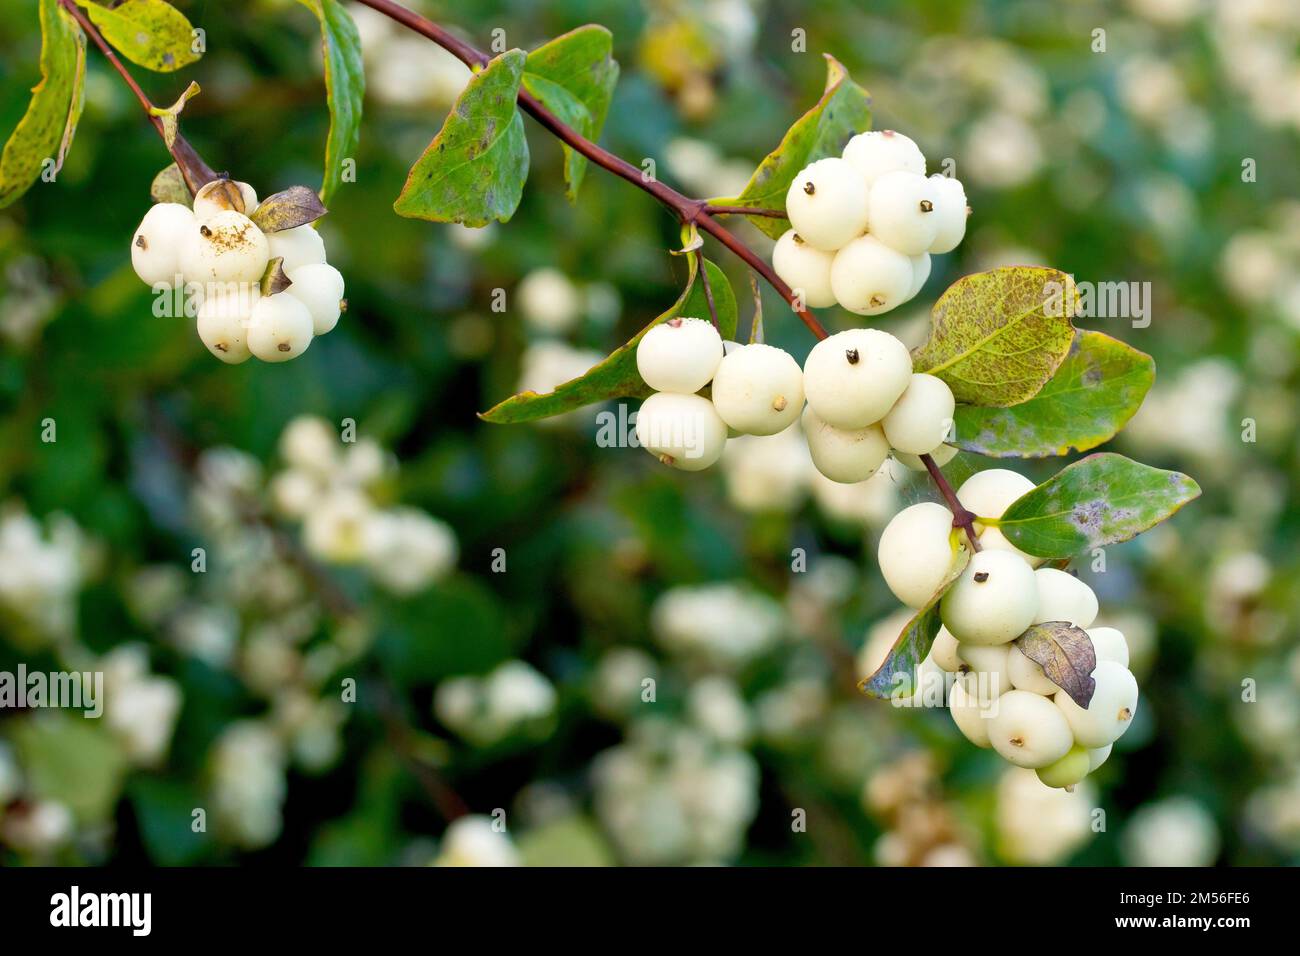 Snowberry (symphoricarpos rivularis), close up showing the clusters of white berries the commonly planted shrub produces during the autumn. Stock Photo